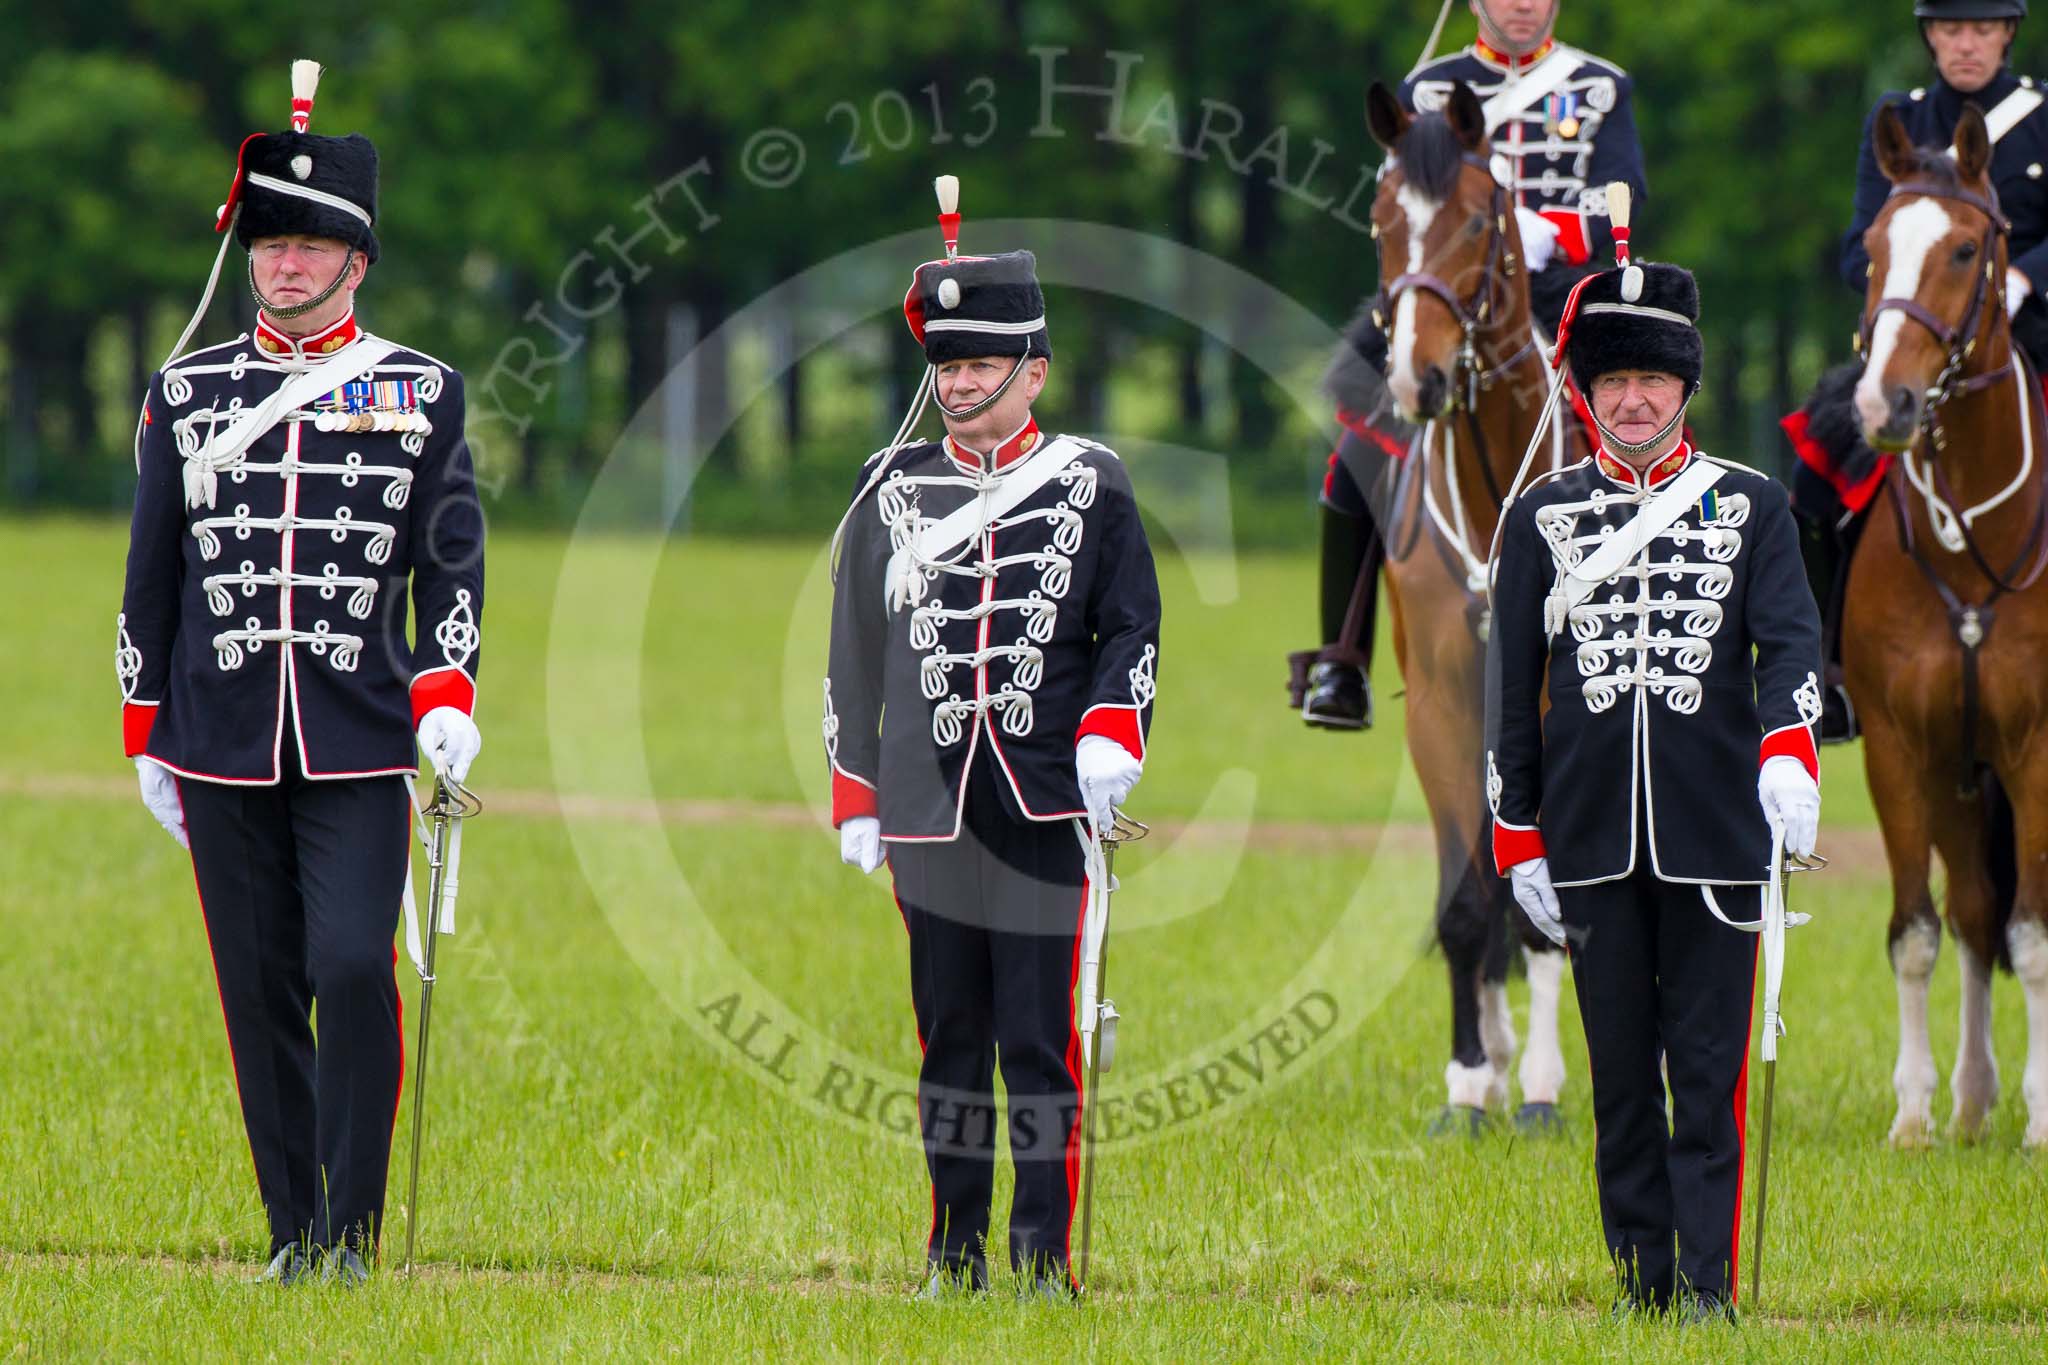 The Light Cavalry HAC Annual Review and Inspection 2013.
Windsor Great Park Review Ground,
Windsor,
Berkshire,
United Kingdom,
on 09 June 2013 at 13:02, image #276